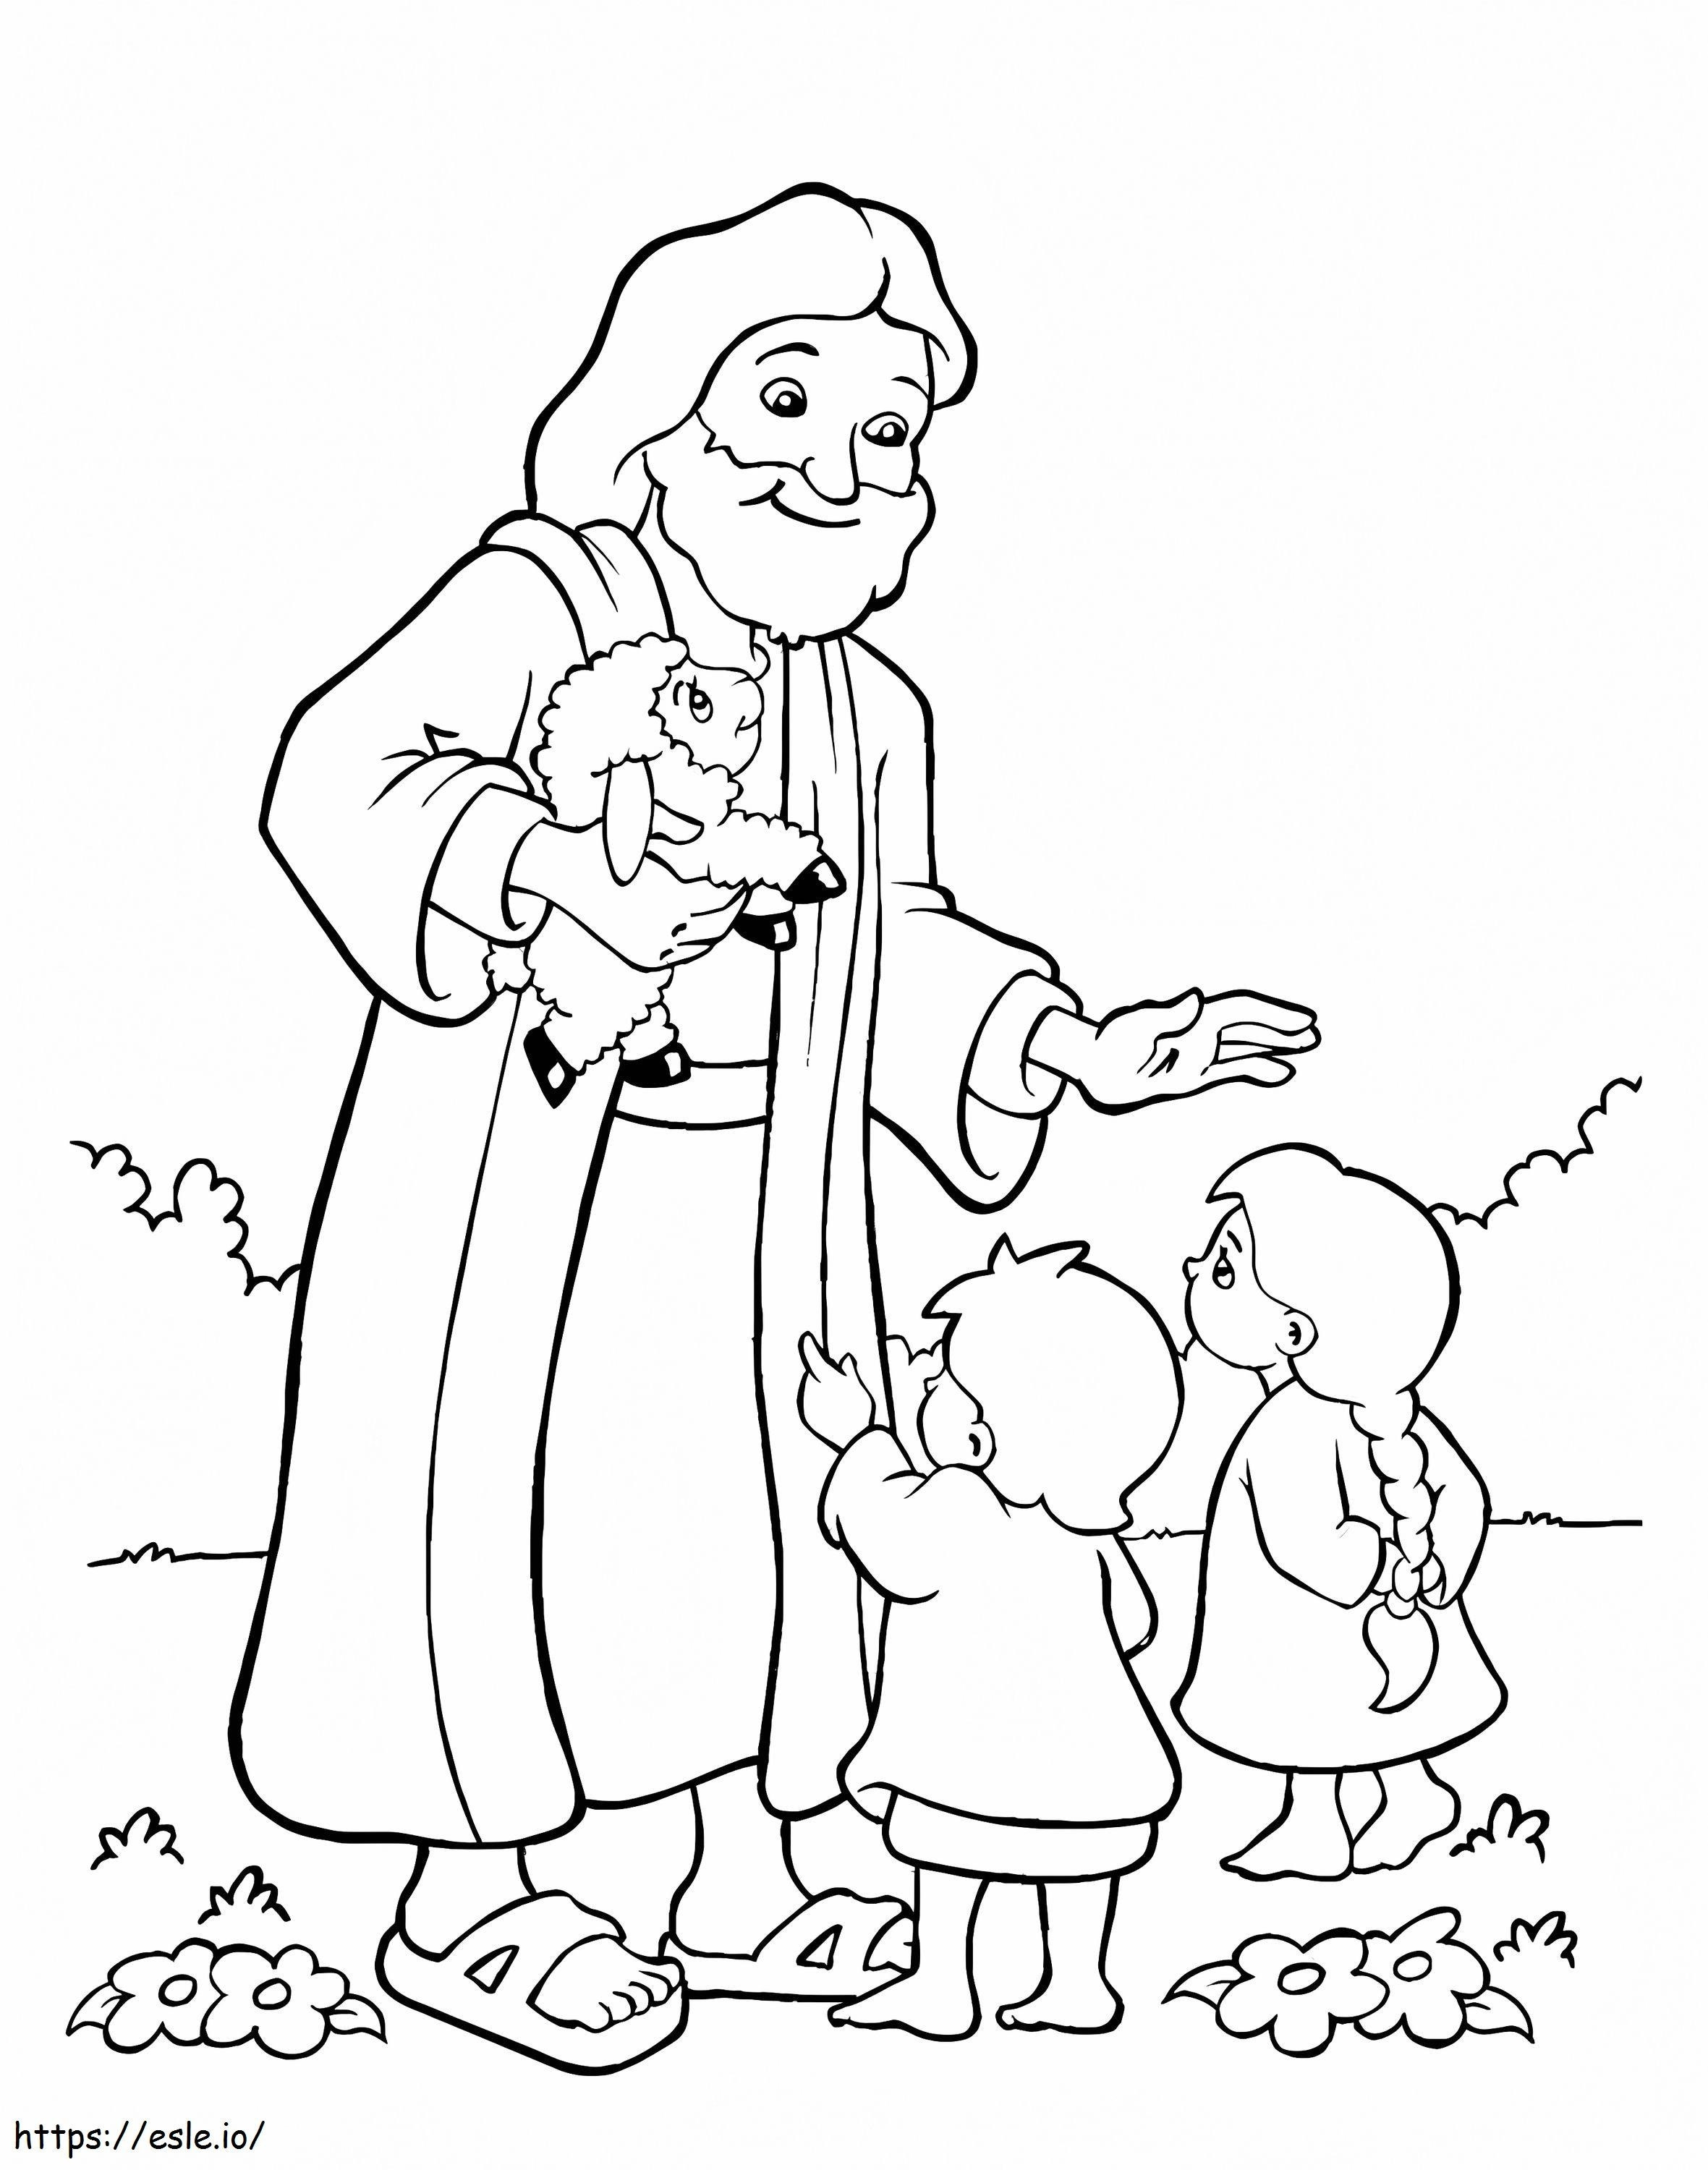 Jesus With Sheep And Two Sons coloring page